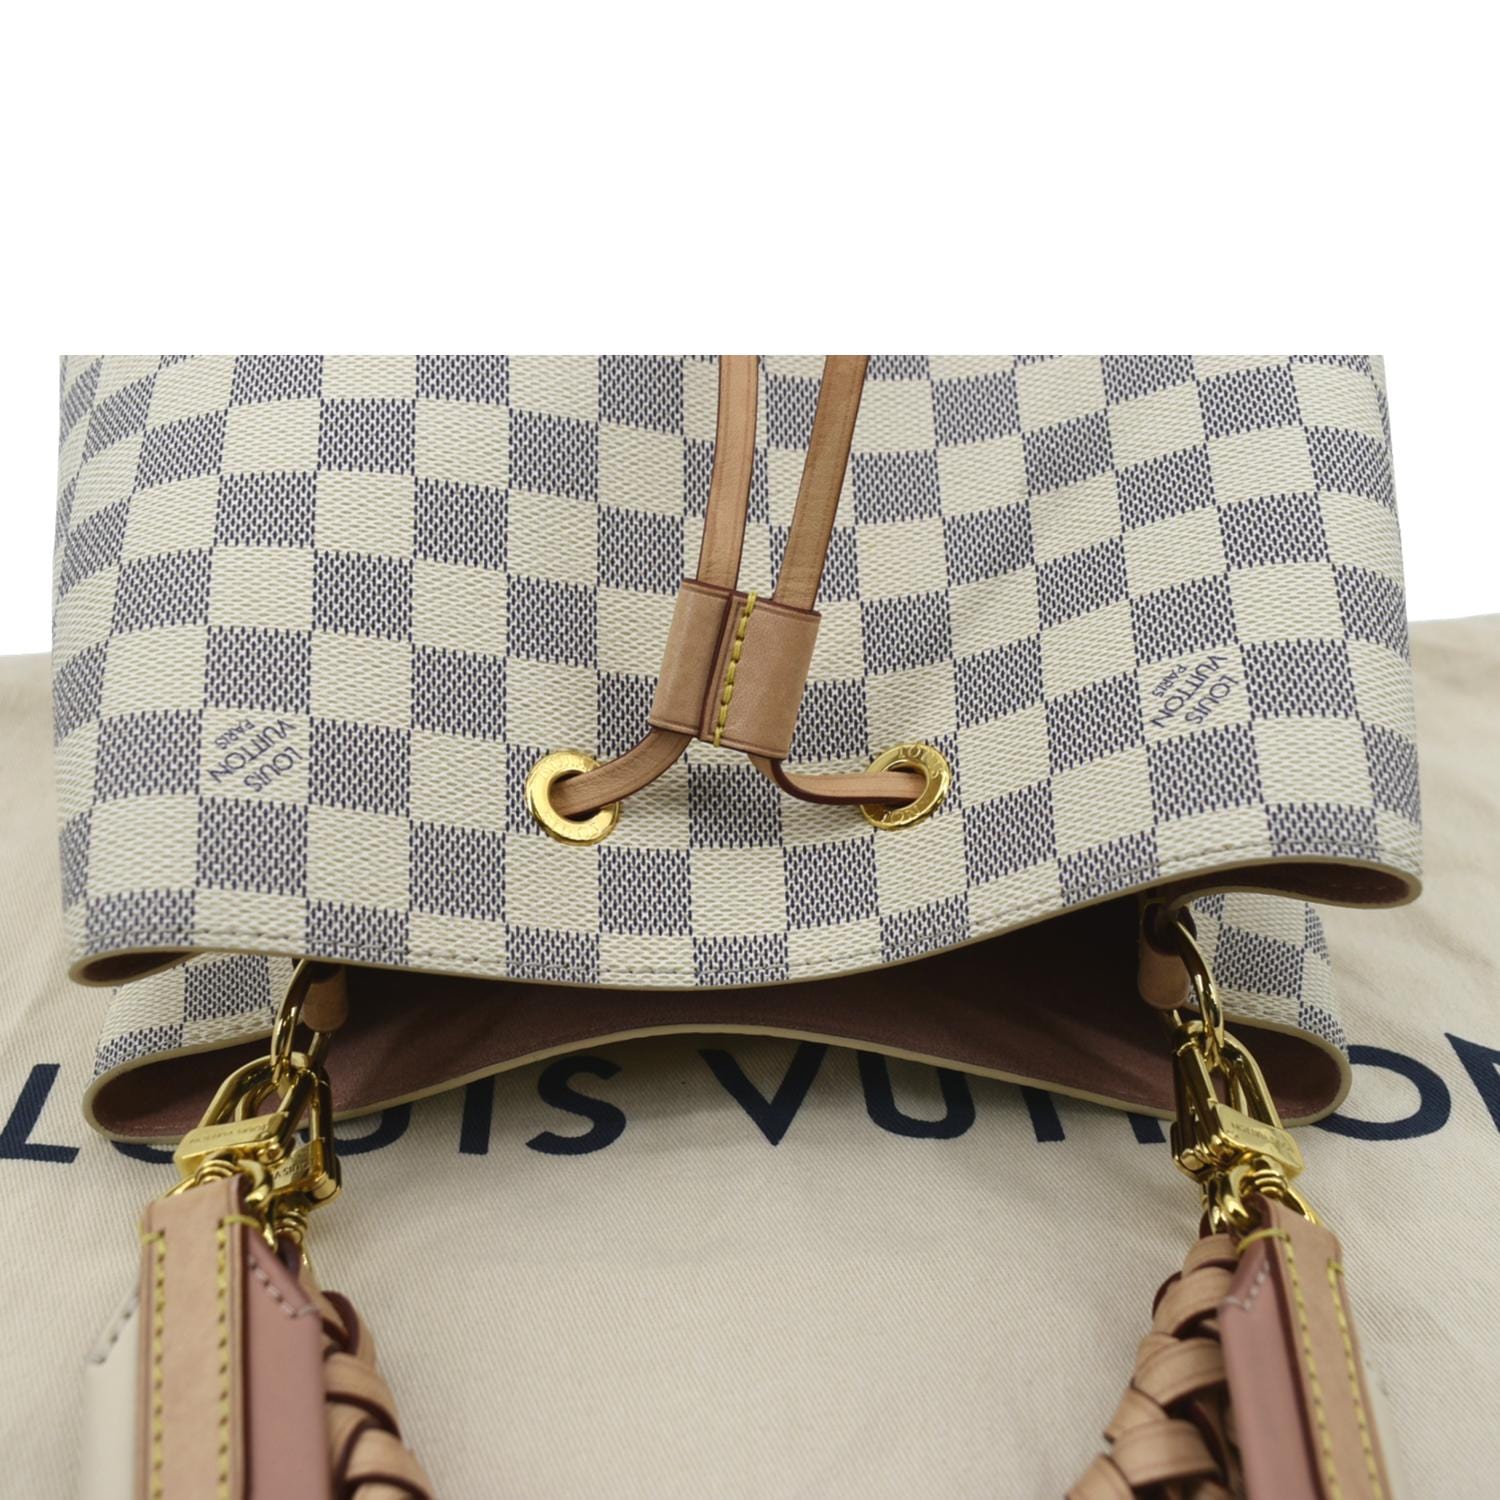 neverfull with braided strap